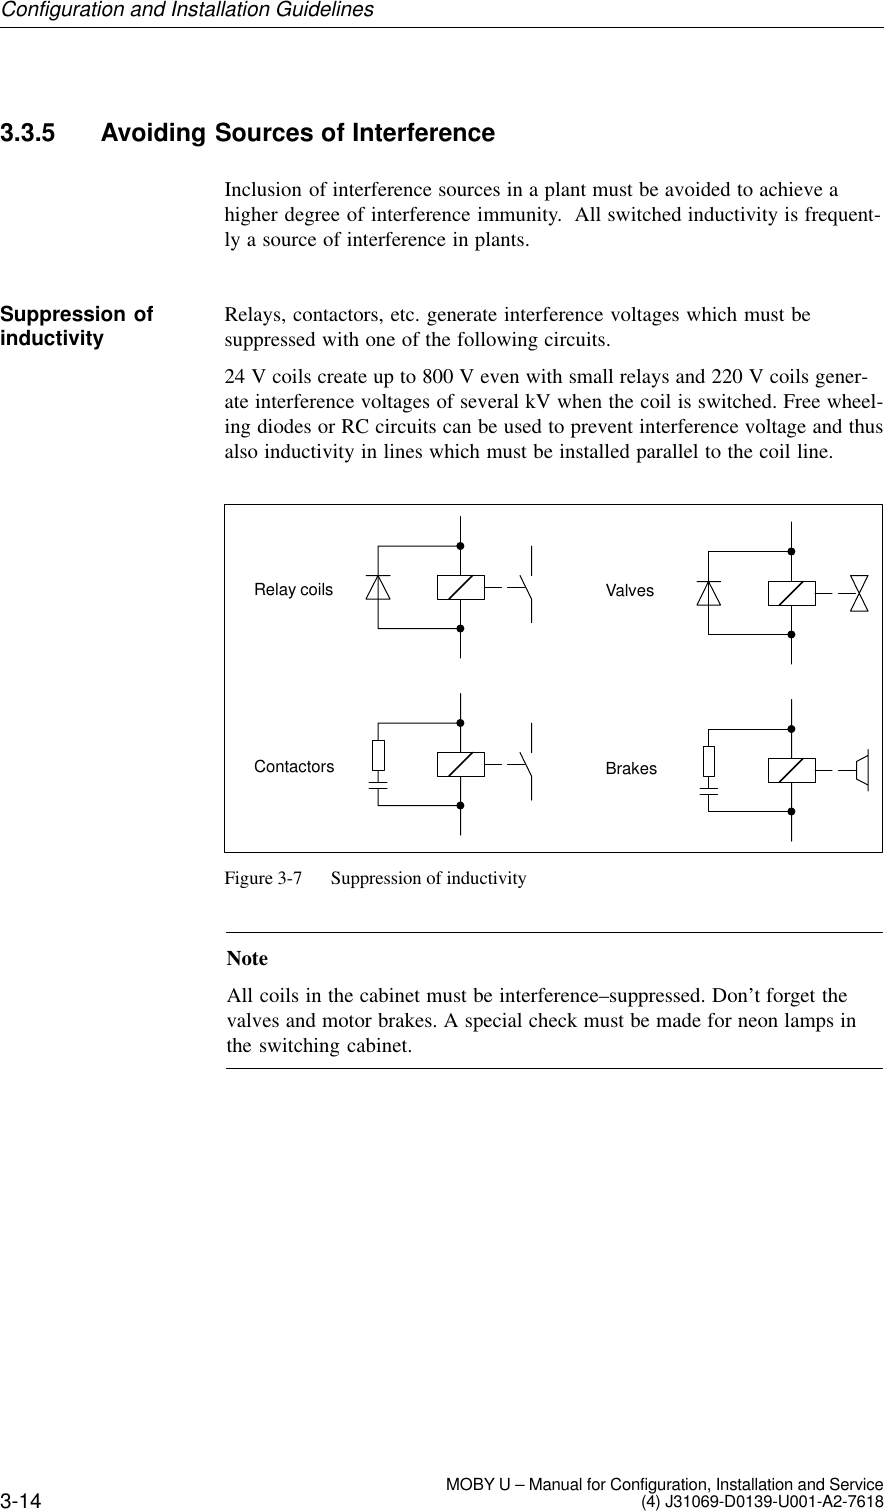 3-14 MOBY U – Manual for Configuration, Installation and Service(4) J31069-D0139-U001-A2-76183.3.5 Avoiding Sources of InterferenceInclusion of interference sources in a plant must be avoided to achieve ahigher degree of interference immunity.  All switched inductivity is frequent-ly a source of interference in plants.Relays, contactors, etc. generate interference voltages which must besuppressed with one of the following circuits.24 V coils create up to 800 V even with small relays and 220 V coils gener-ate interference voltages of several kV when the coil is switched. Free wheel-ing diodes or RC circuits can be used to prevent interference voltage and thusalso inductivity in lines which must be installed parallel to the coil line.Relay coilsContactorsValvesBrakesFigure 3-7 Suppression of inductivityNoteAll coils in the cabinet must be interference–suppressed. Don’t forget thevalves and motor brakes. A special check must be made for neon lamps inthe switching cabinet.Suppression ofinductivityConfiguration and Installation Guidelines